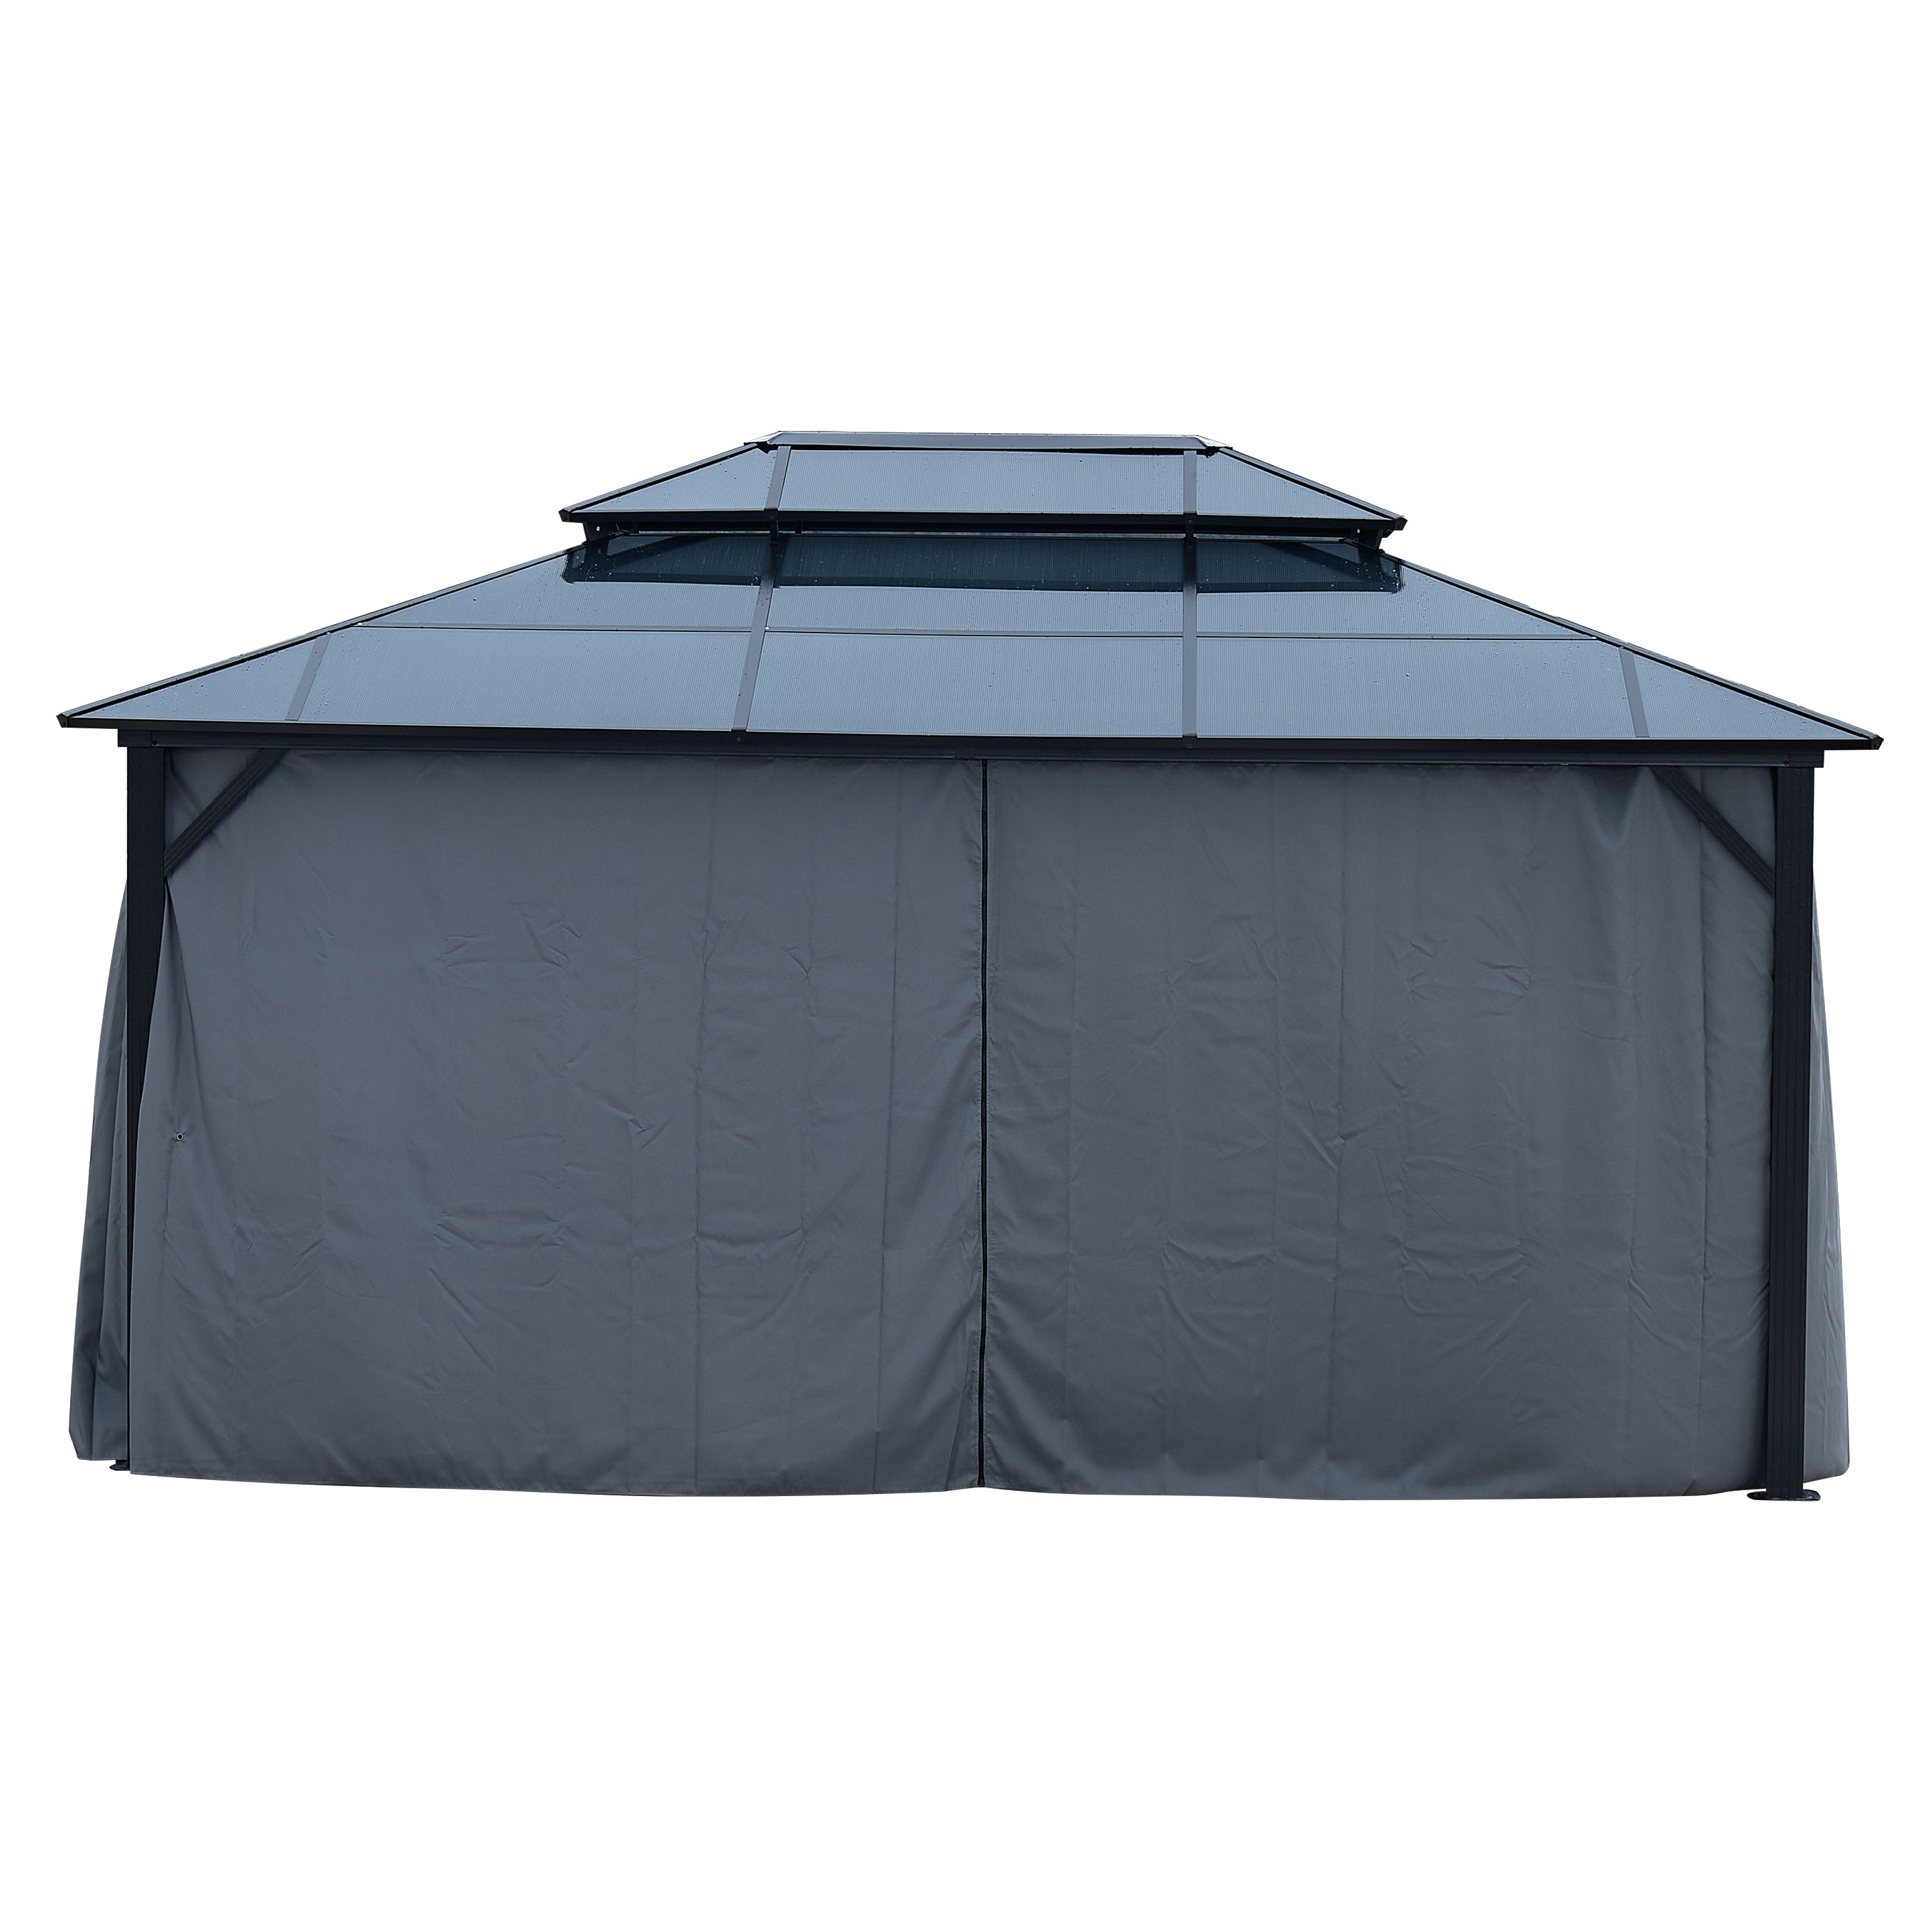 10'x13' Hardtop Gazebo, Outdoor Polycarbonate Double Roof Canopy, Aluminum Frame Permanent Pavilion with Curtains and Netting, Sunshade for Garden, Patio, Lawns